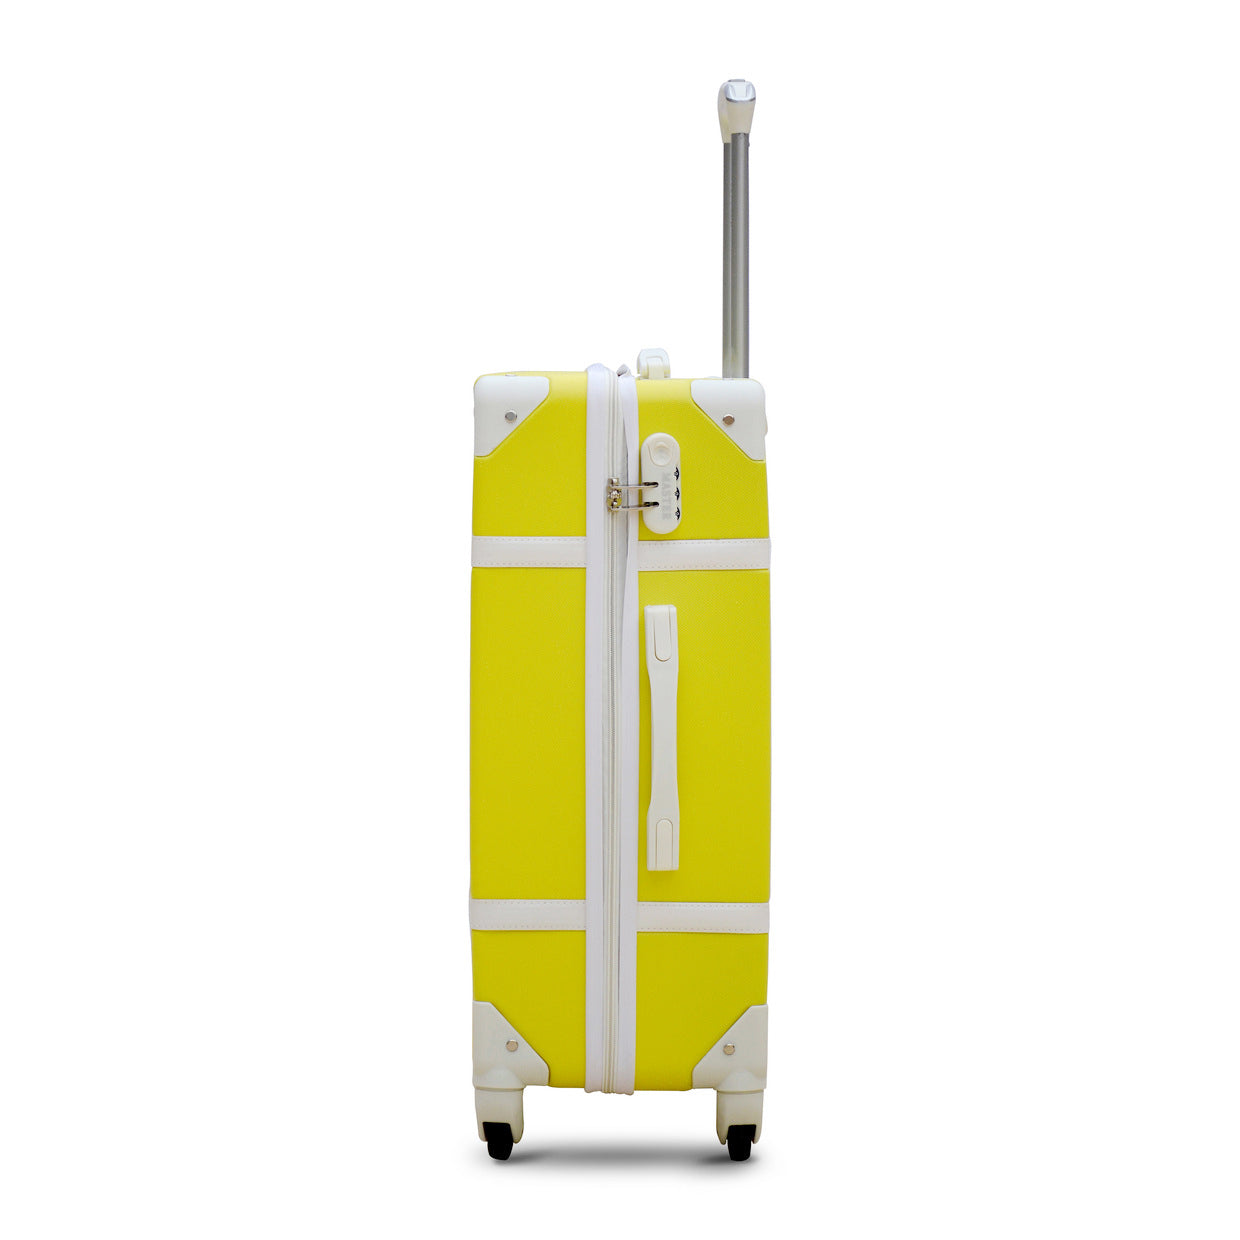 Corner Guard Lightweight ABS Yellow Luggage | Hard Case Trolley Bag | 4 Pcs Full Set 7” 20” 24” 28”inches